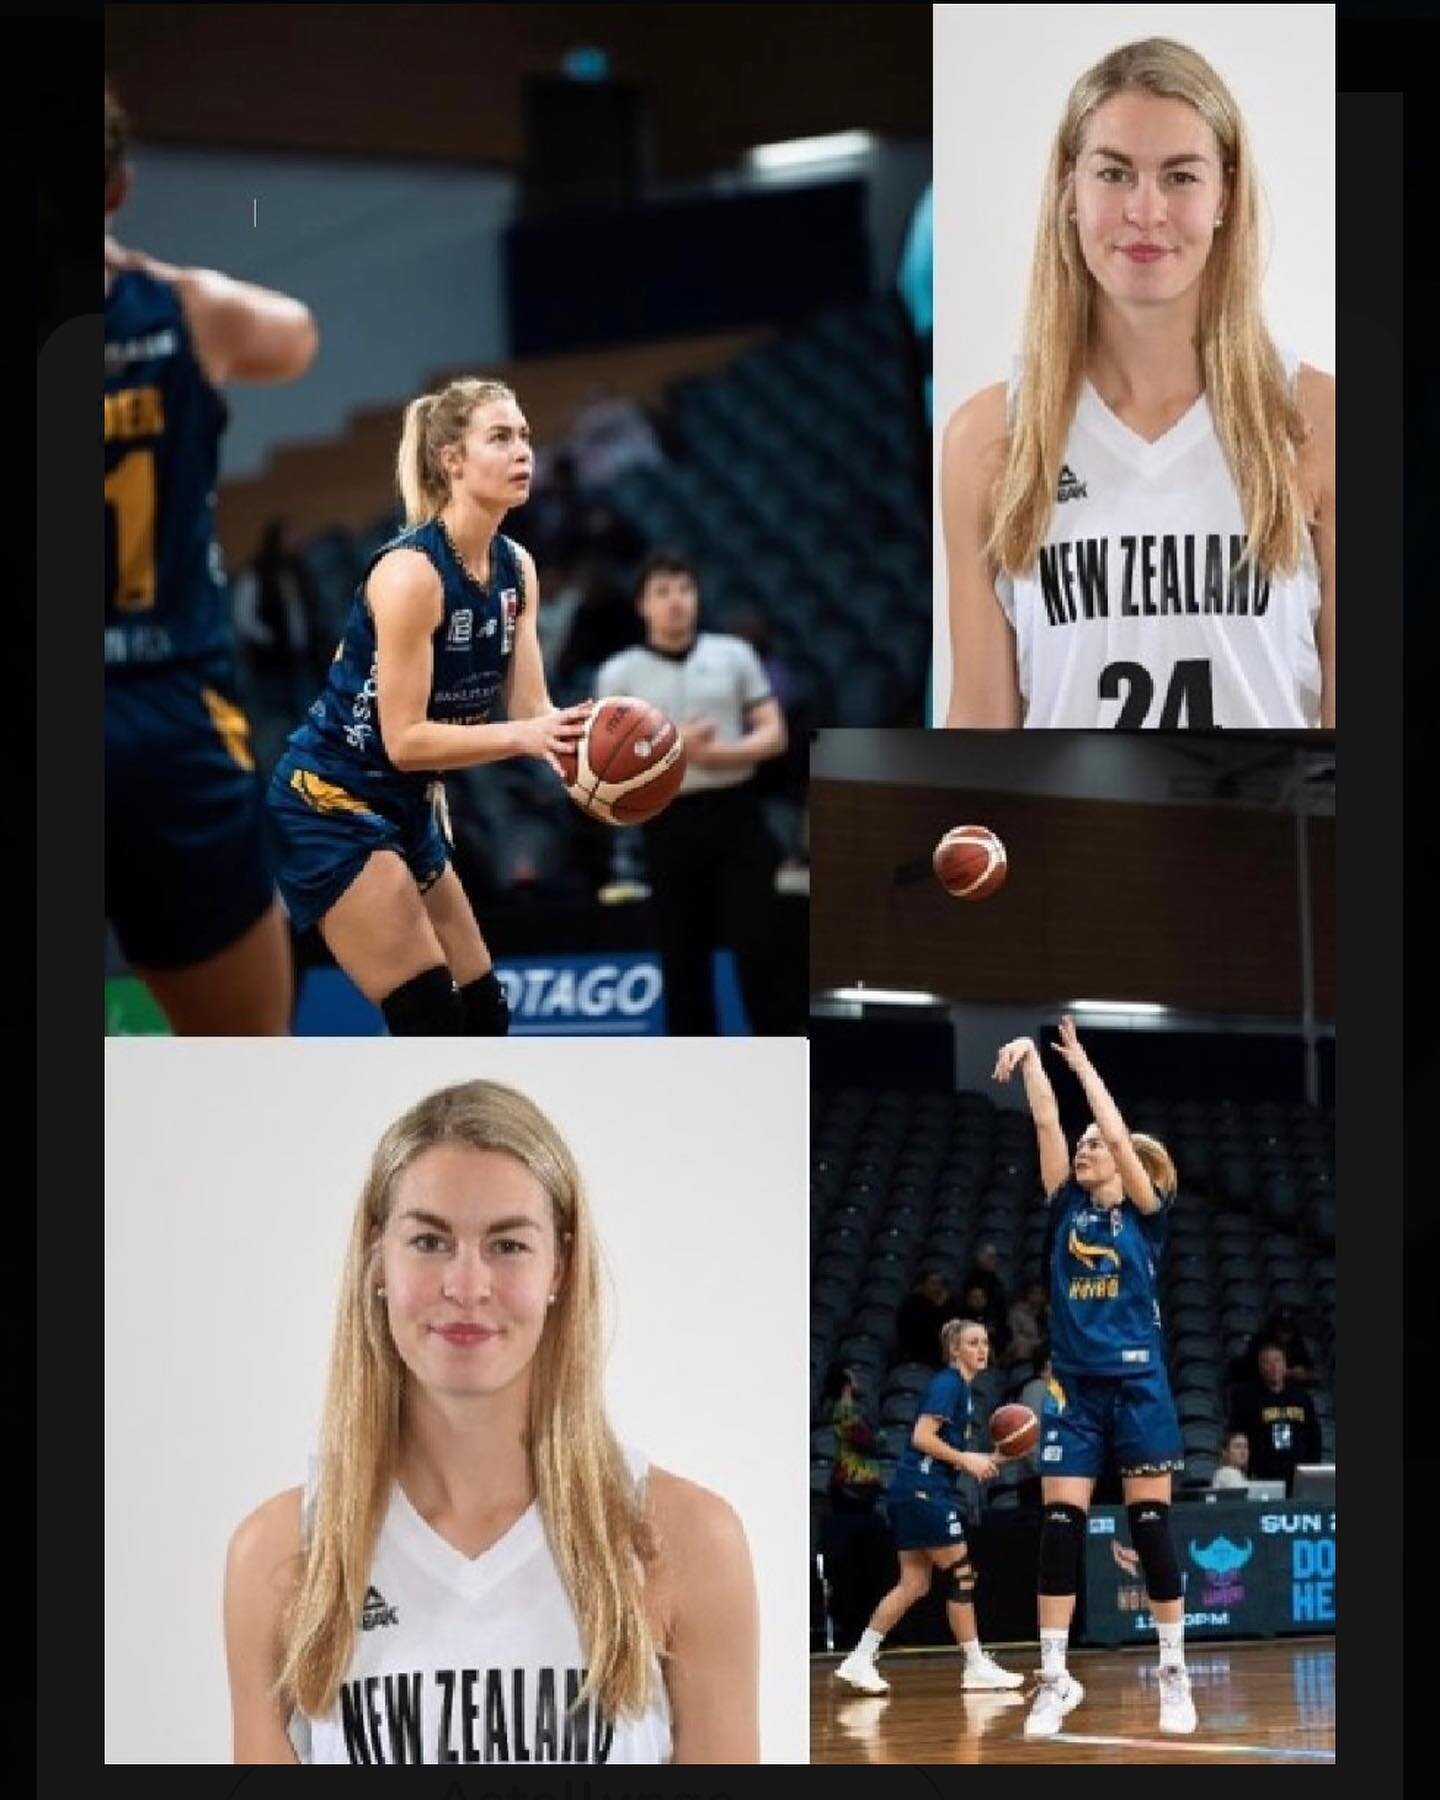 Congratulations Zoe Richards ✍️🇱🇺✈️🏀

We are super thrilled to see that Zoe Richards has signed with the Luxembourg club Amis du Basket Contern. The club has been in existence since 1956 and is one of 23 teams that compete in the FLBB league in Lu